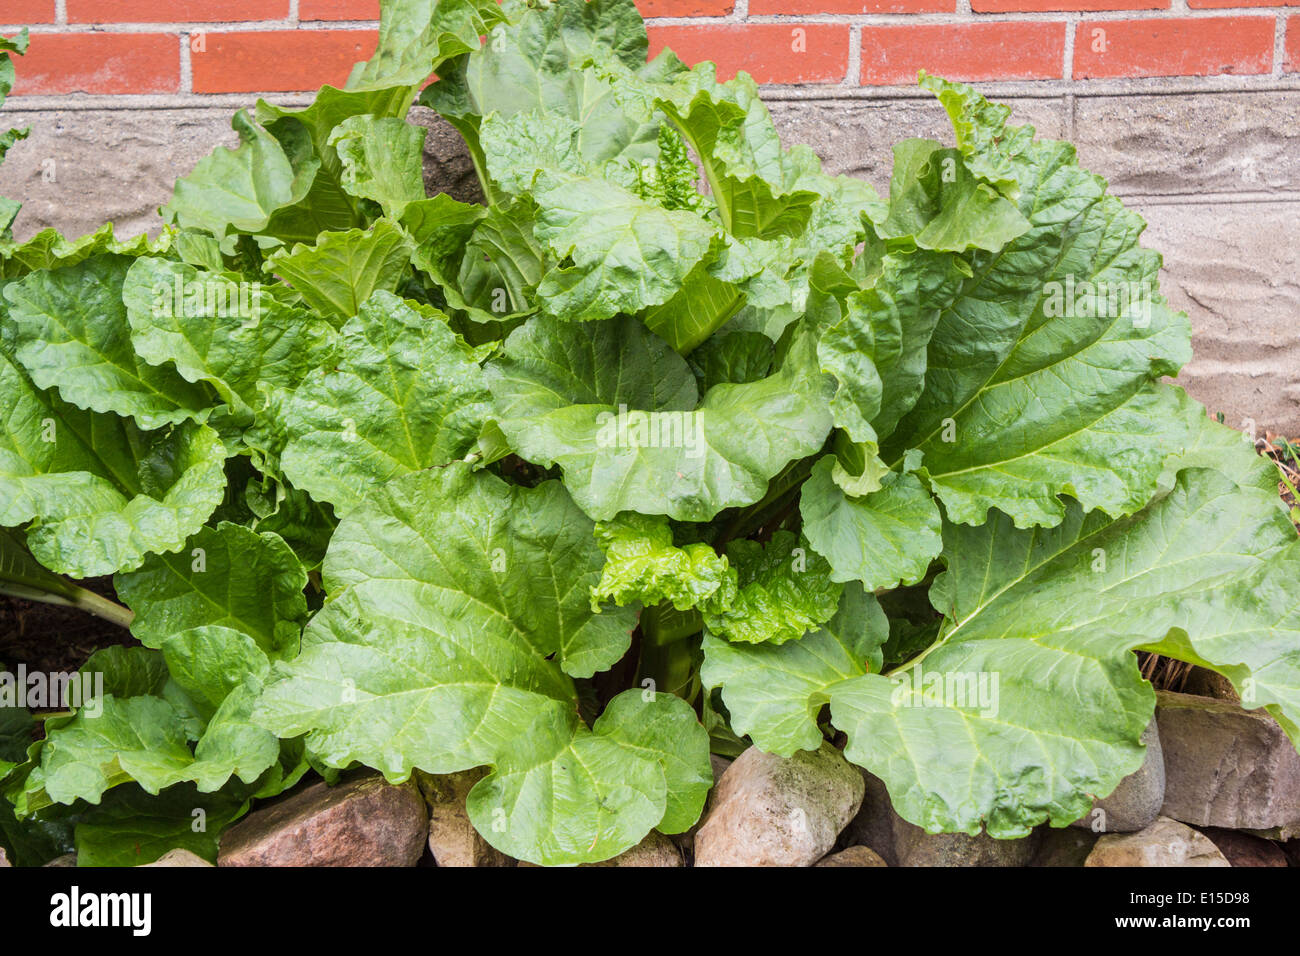 Rhubarb plant growing in a garden Stock Photo